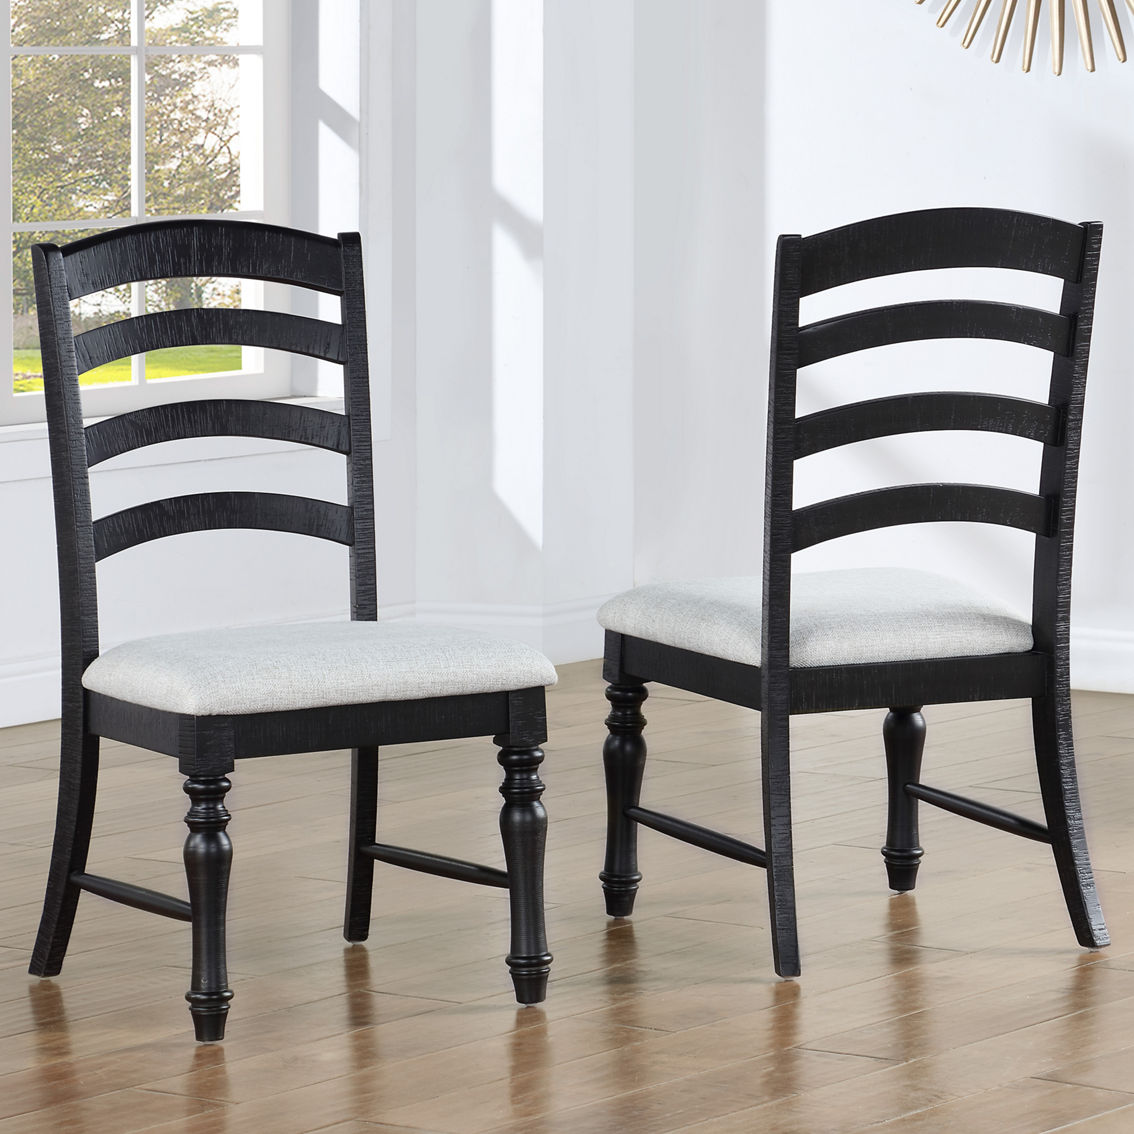 Steve Silver Odessa Black 6 pc. Dining Set with Bench - Image 5 of 7